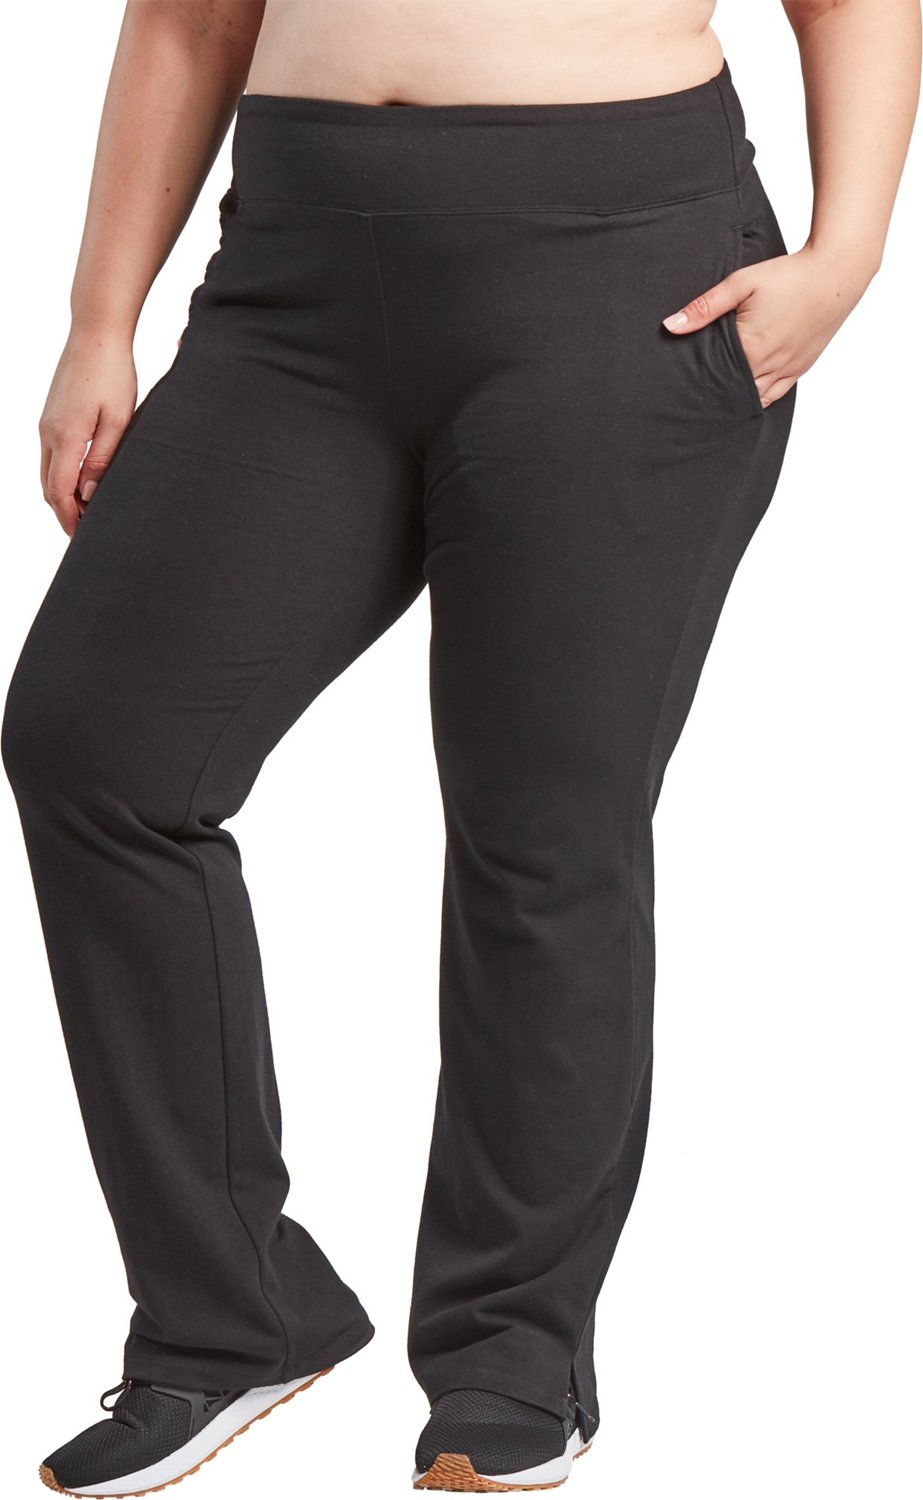 Bcg Womens Plus Size Cotton Wicking Pants Academy